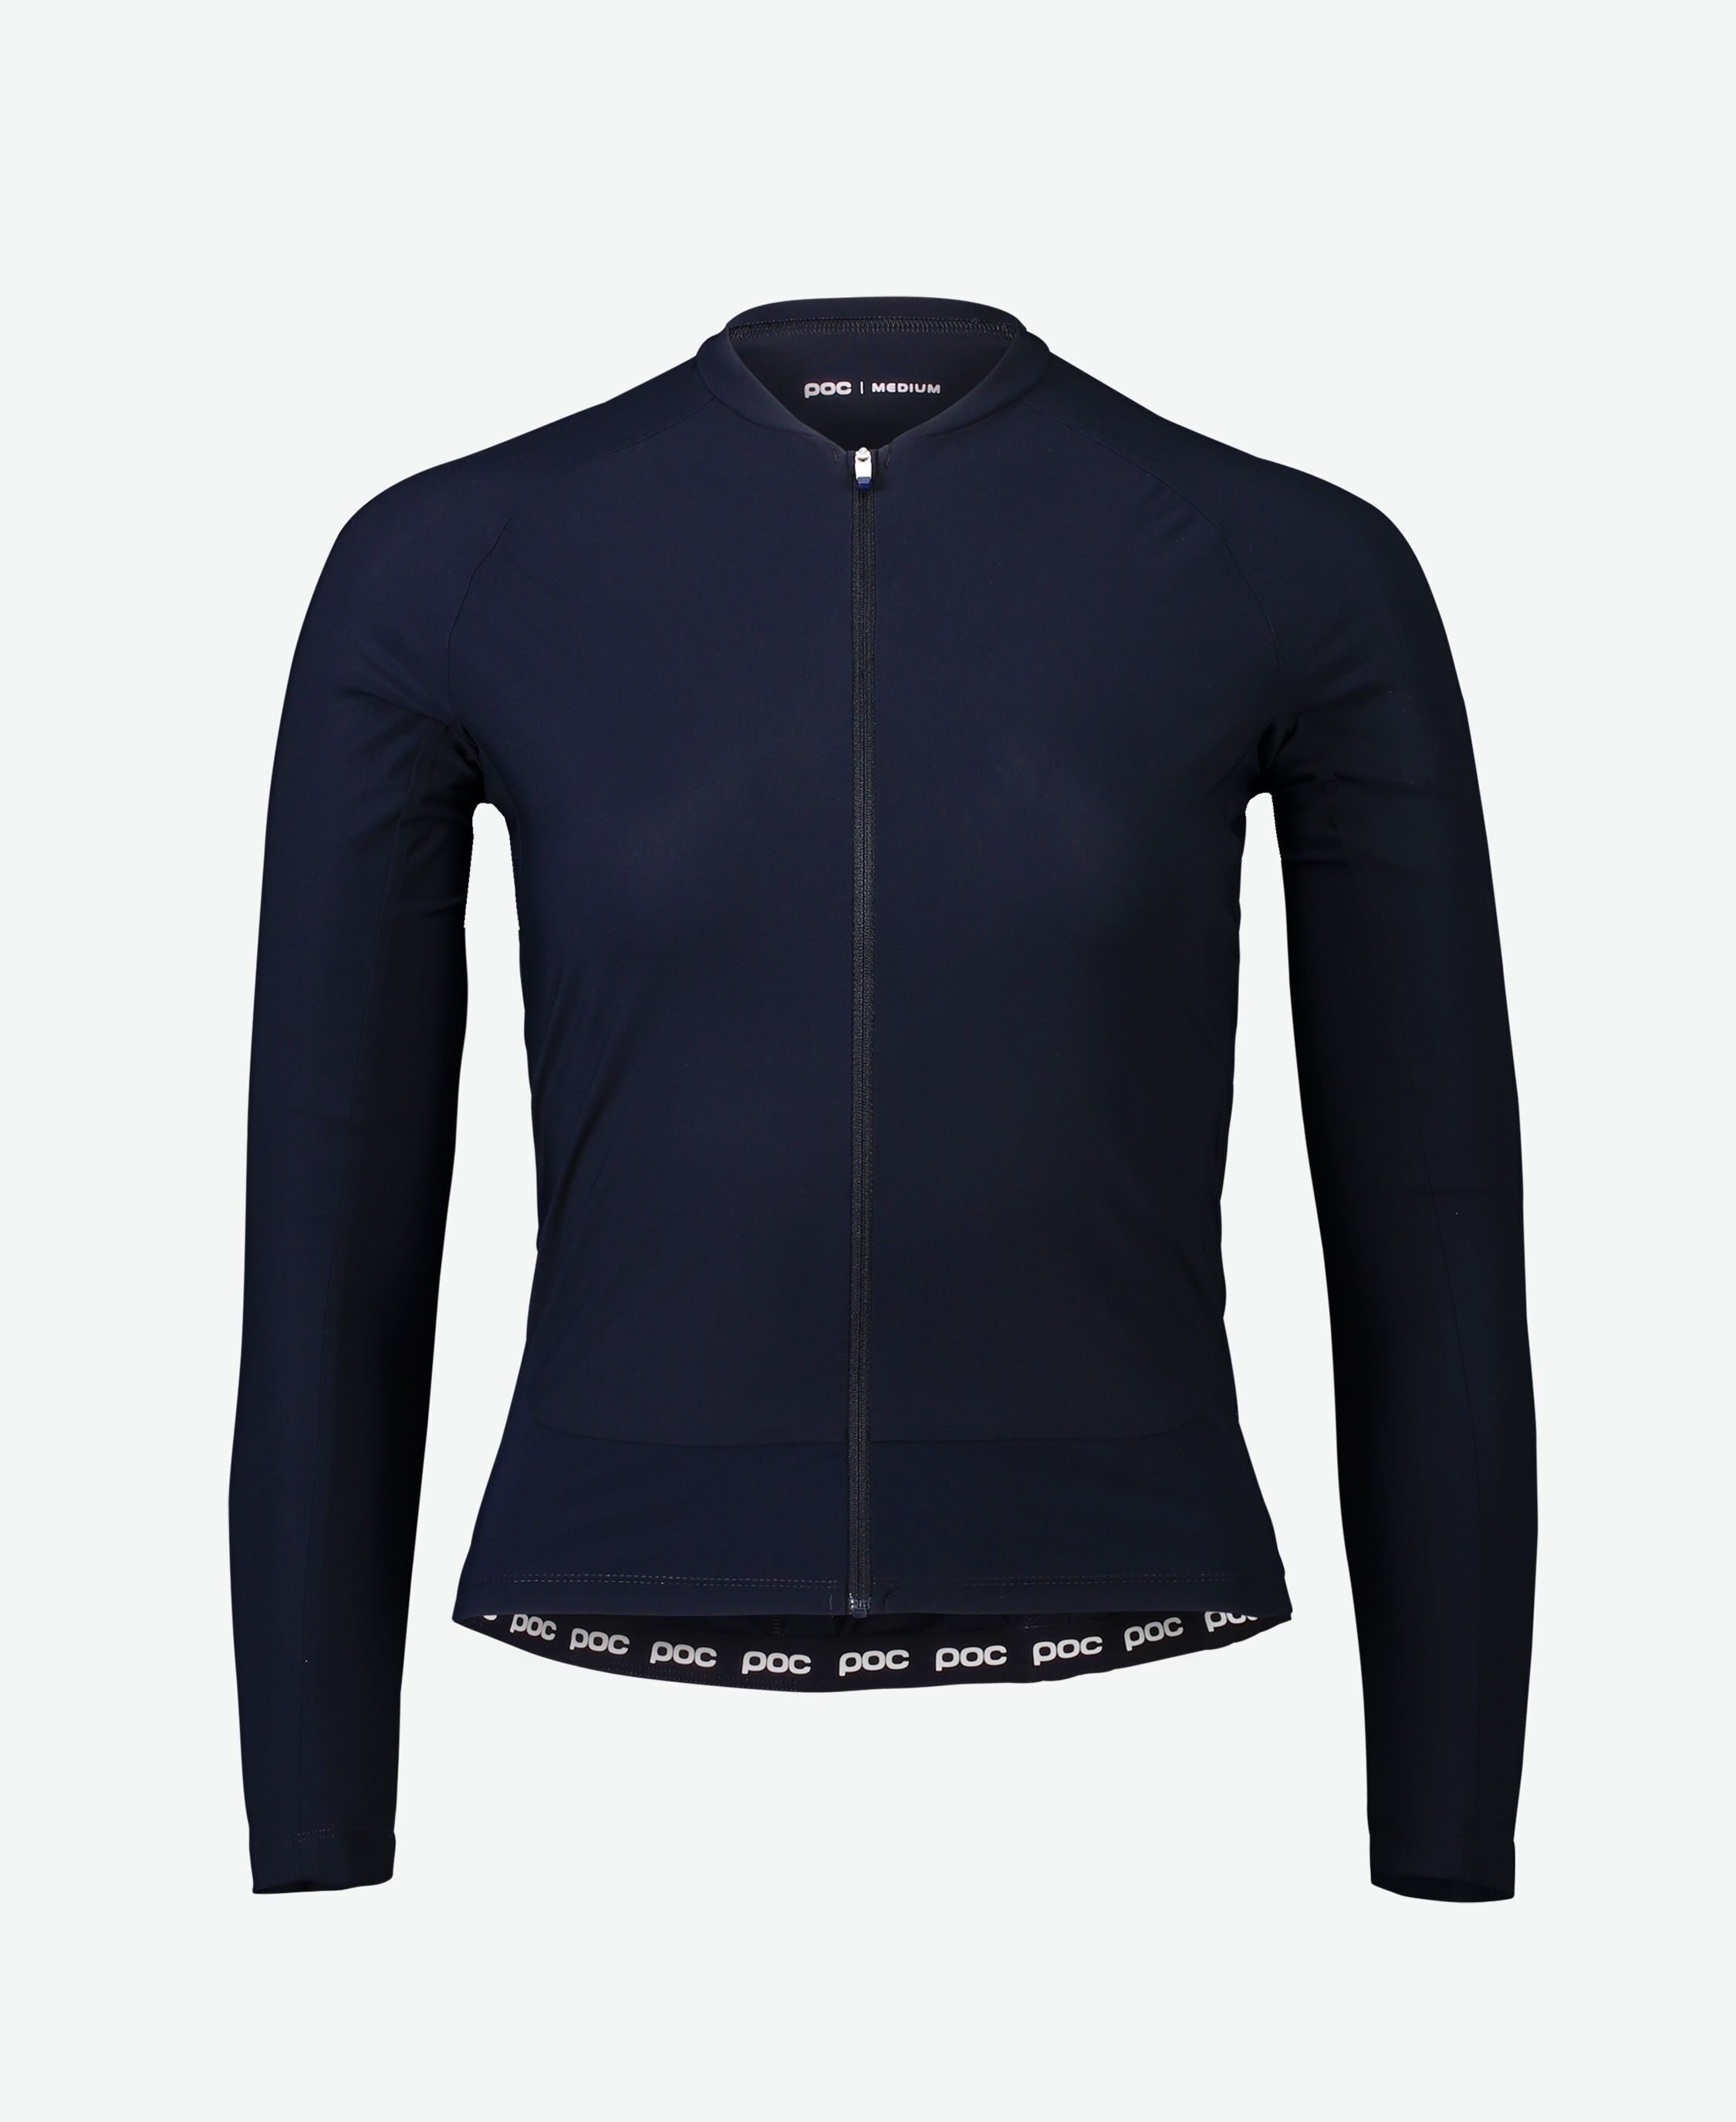 Poc Essential Road W's LS Jersey - Cycling jersey - Women's